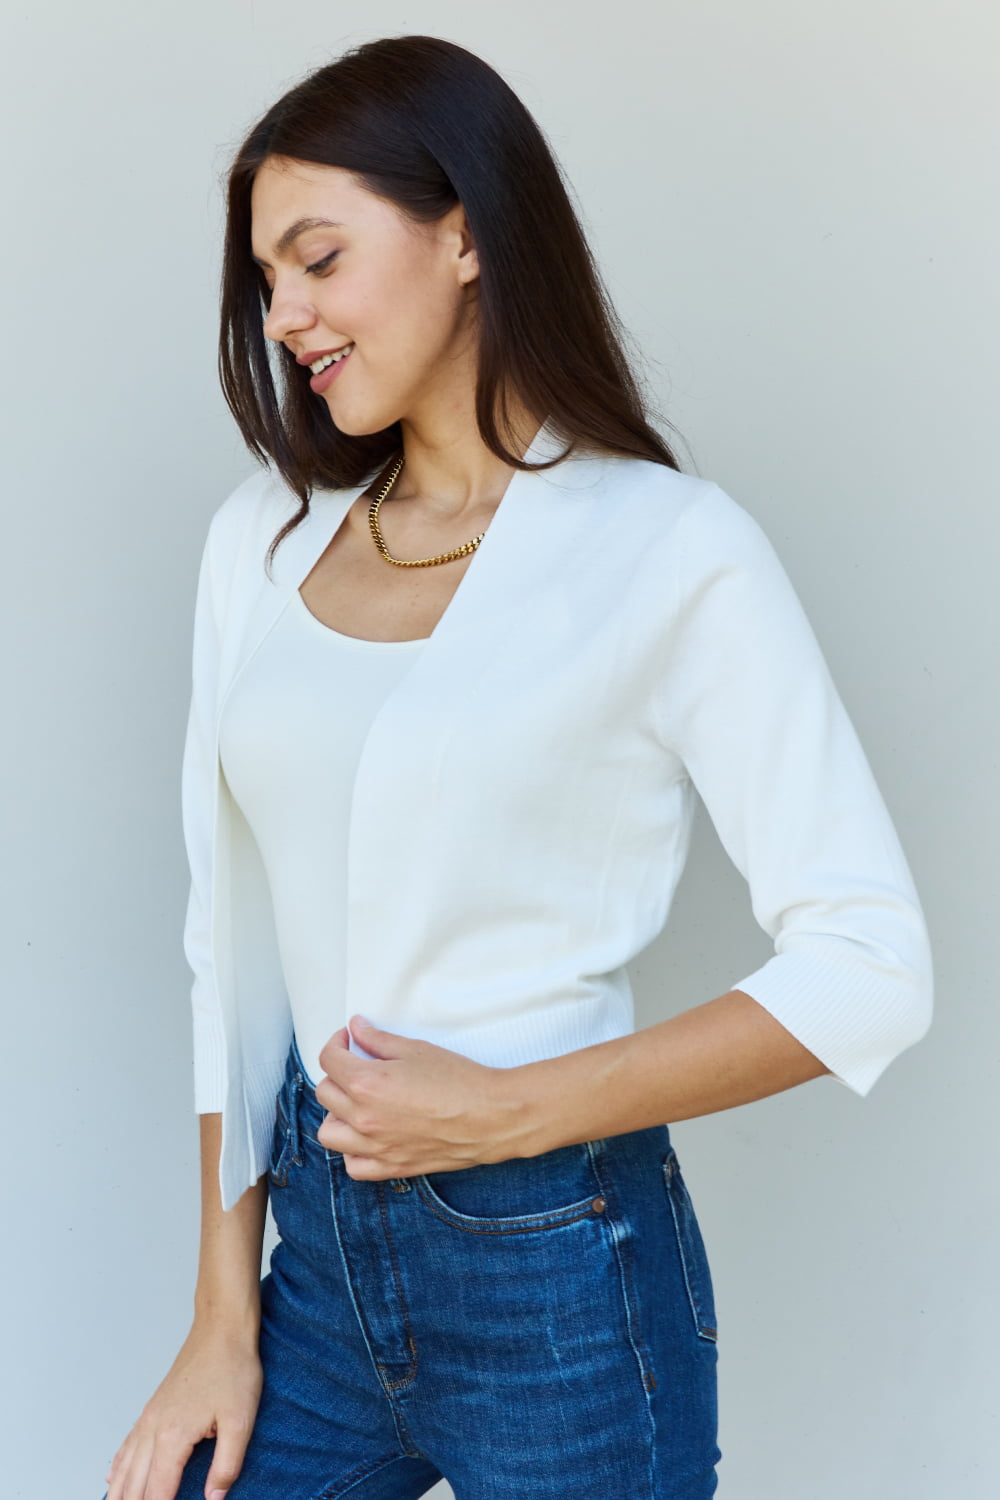 My Favorite Full Size 3/4 Sleeve Cropped Cardigan in Ivory